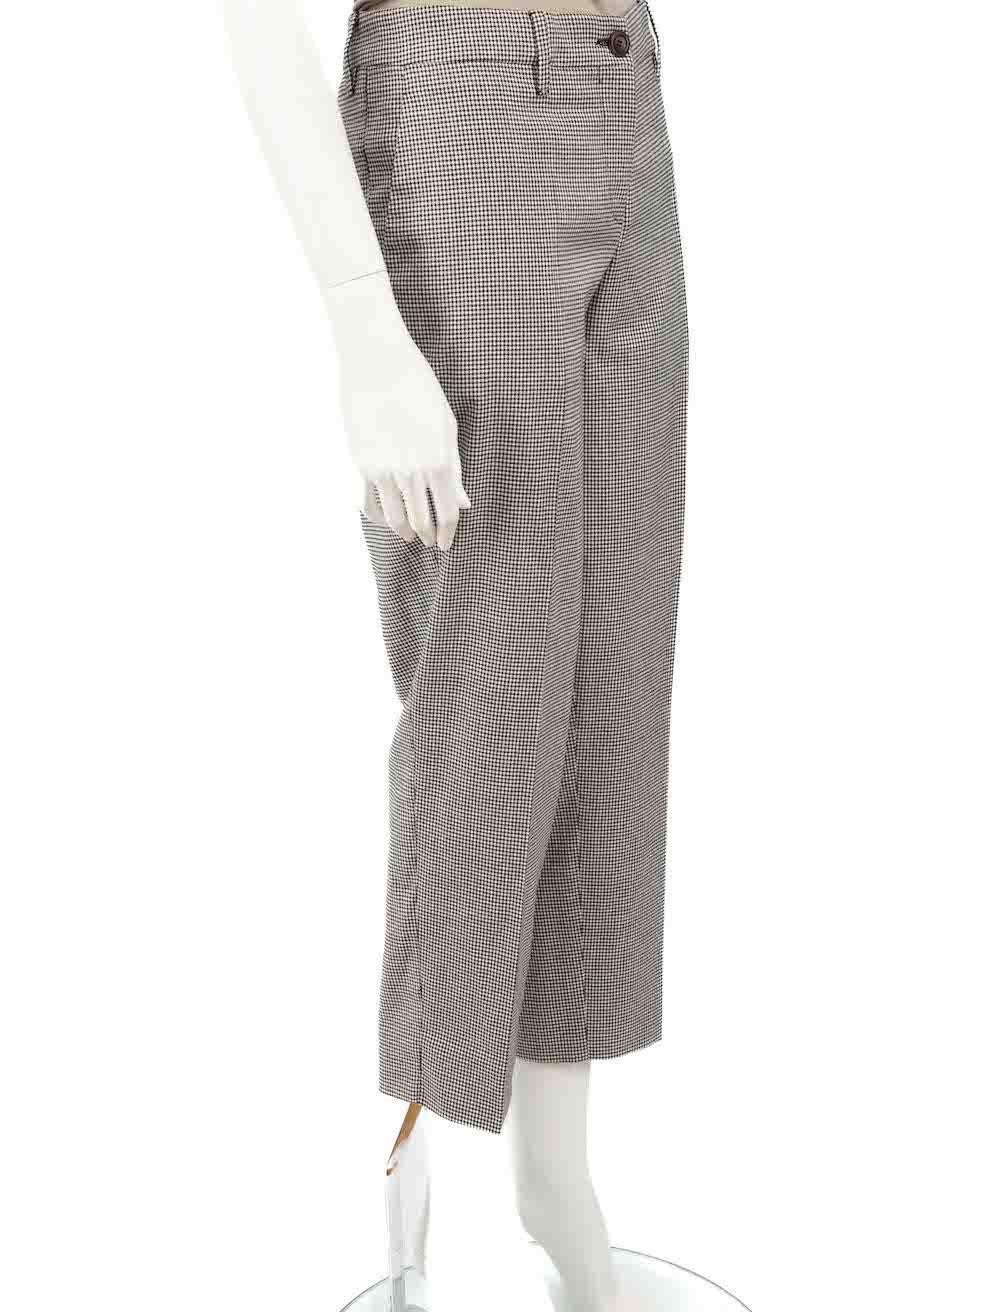 CONDITION is Very good. Hardly any visible wear to trousers is evident on this used Miu Miu designer resale item.
 
 Details
 2014 
 Grey
 Viscose
 Trousers
 Houndstooth pattern
 Straight fit
 Mid rise
 2x Side pockets
 1x Back pocket
 Fly zip and